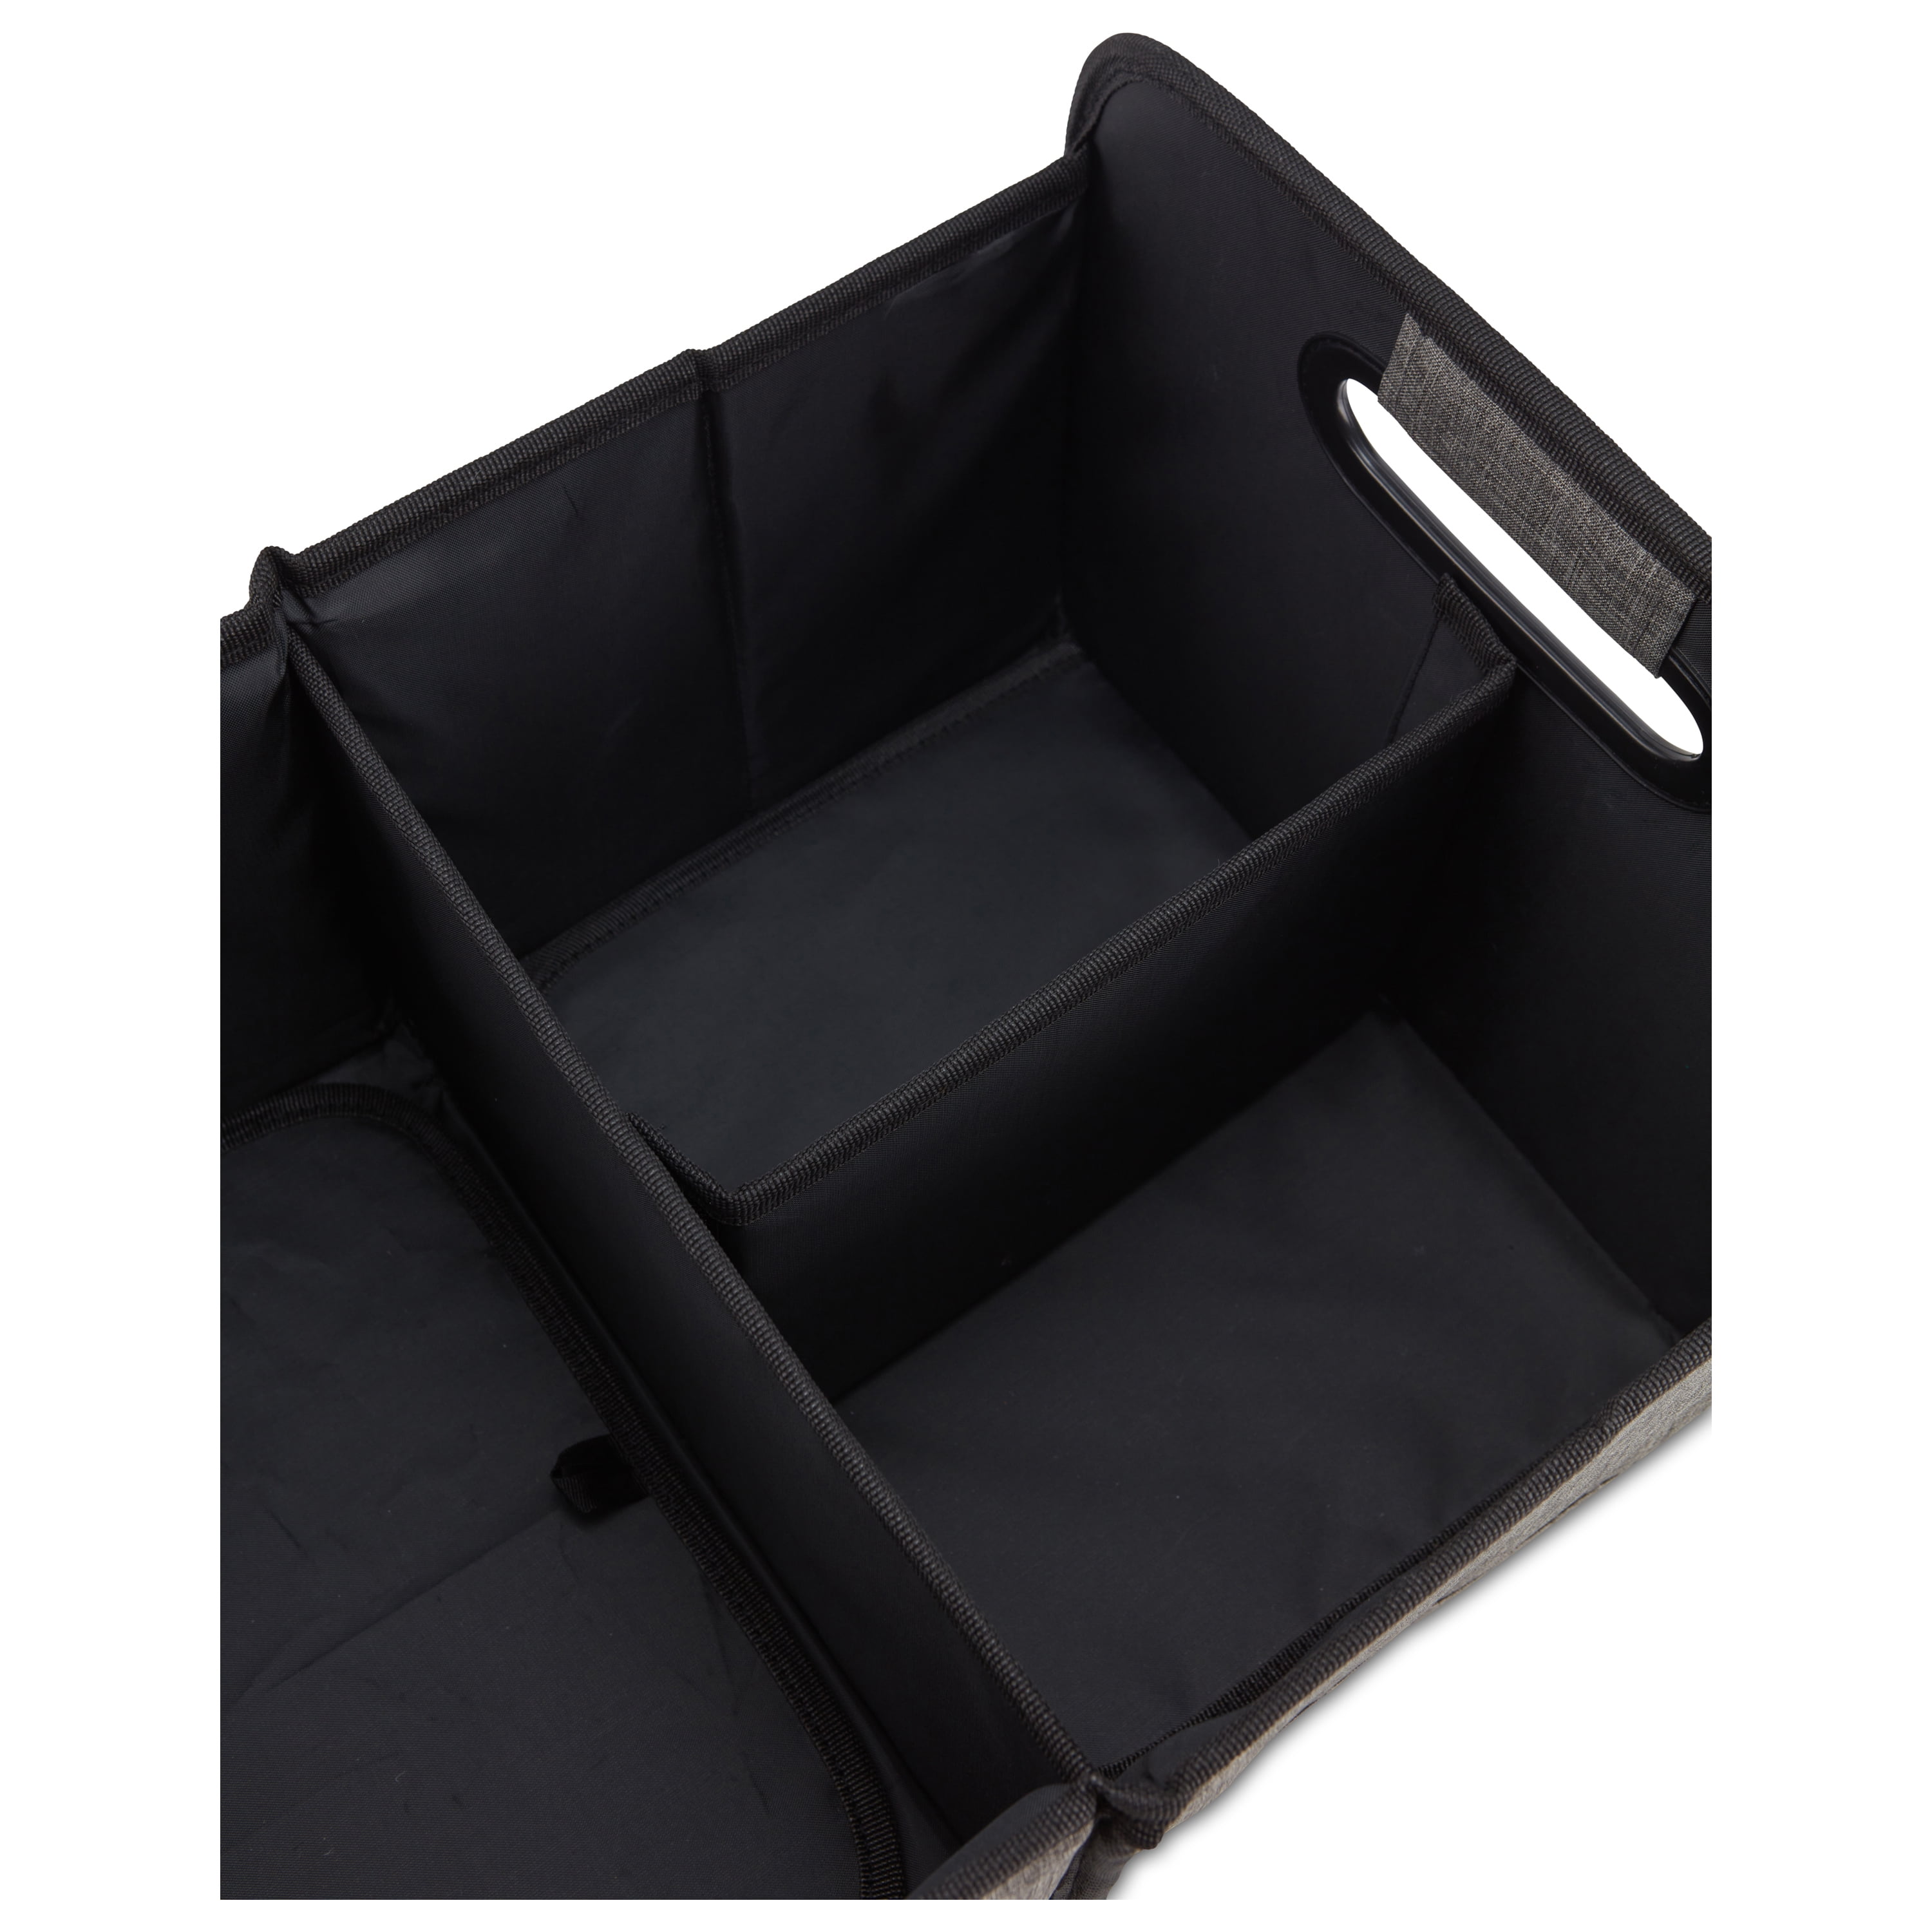 Out-N-About Trunk Organizer & Changing Station